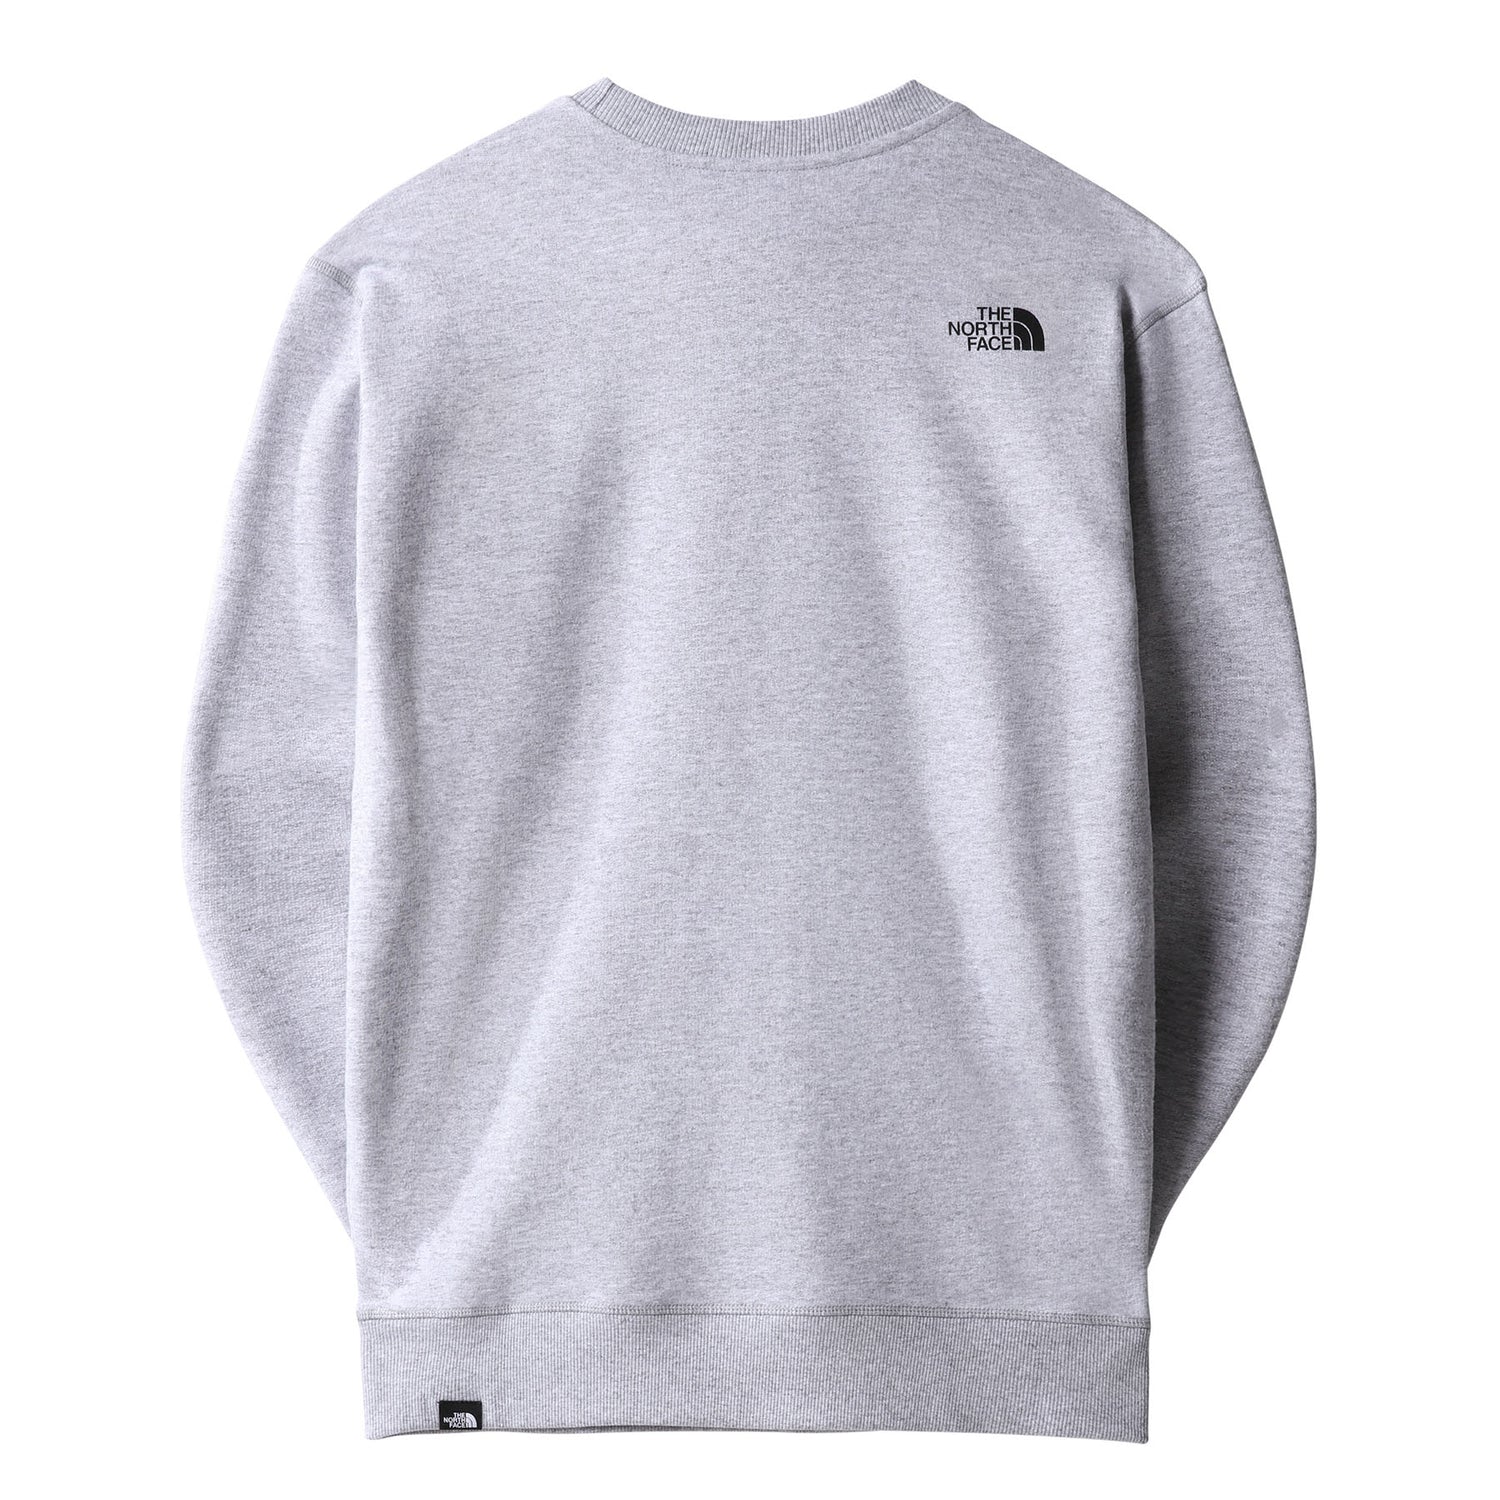 The North Face Men's Simple Dome Crew Top 